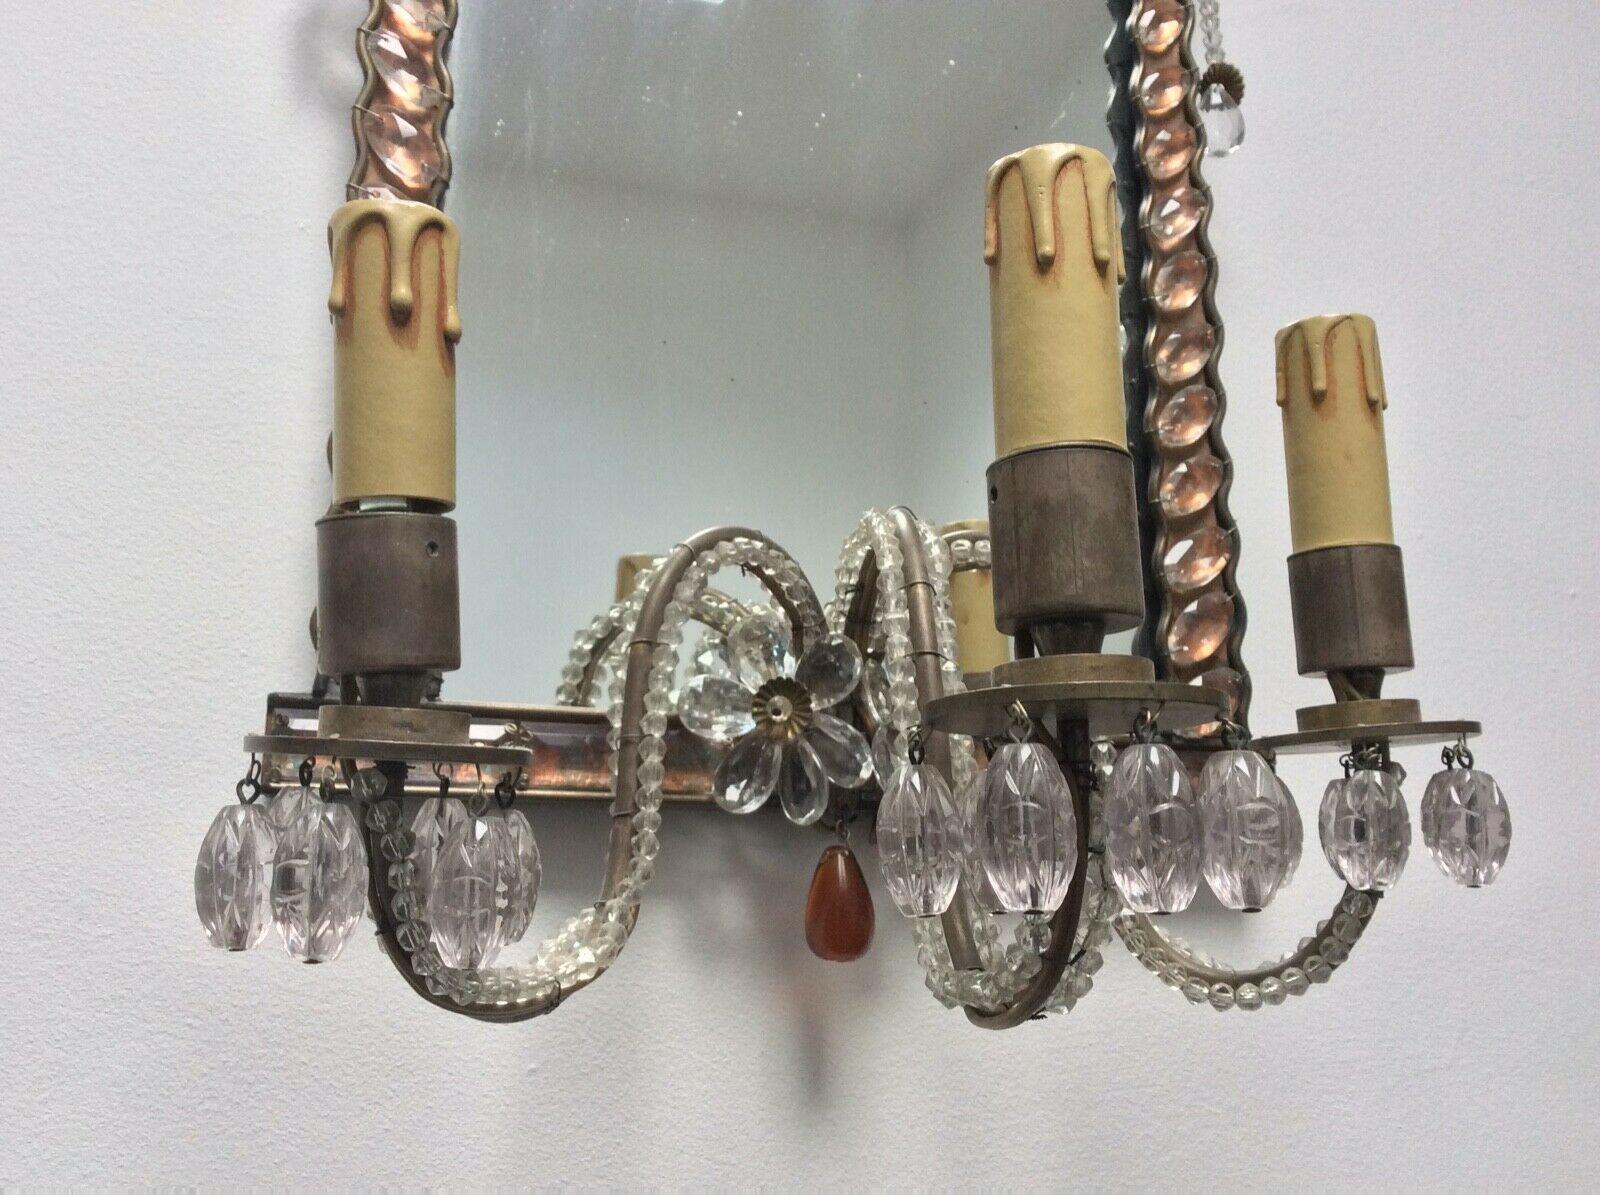 Art Glass Rare 1920s French Art Deco Crystal Maison Bagues Wall Mirror Sconce / Wall Lamp For Sale